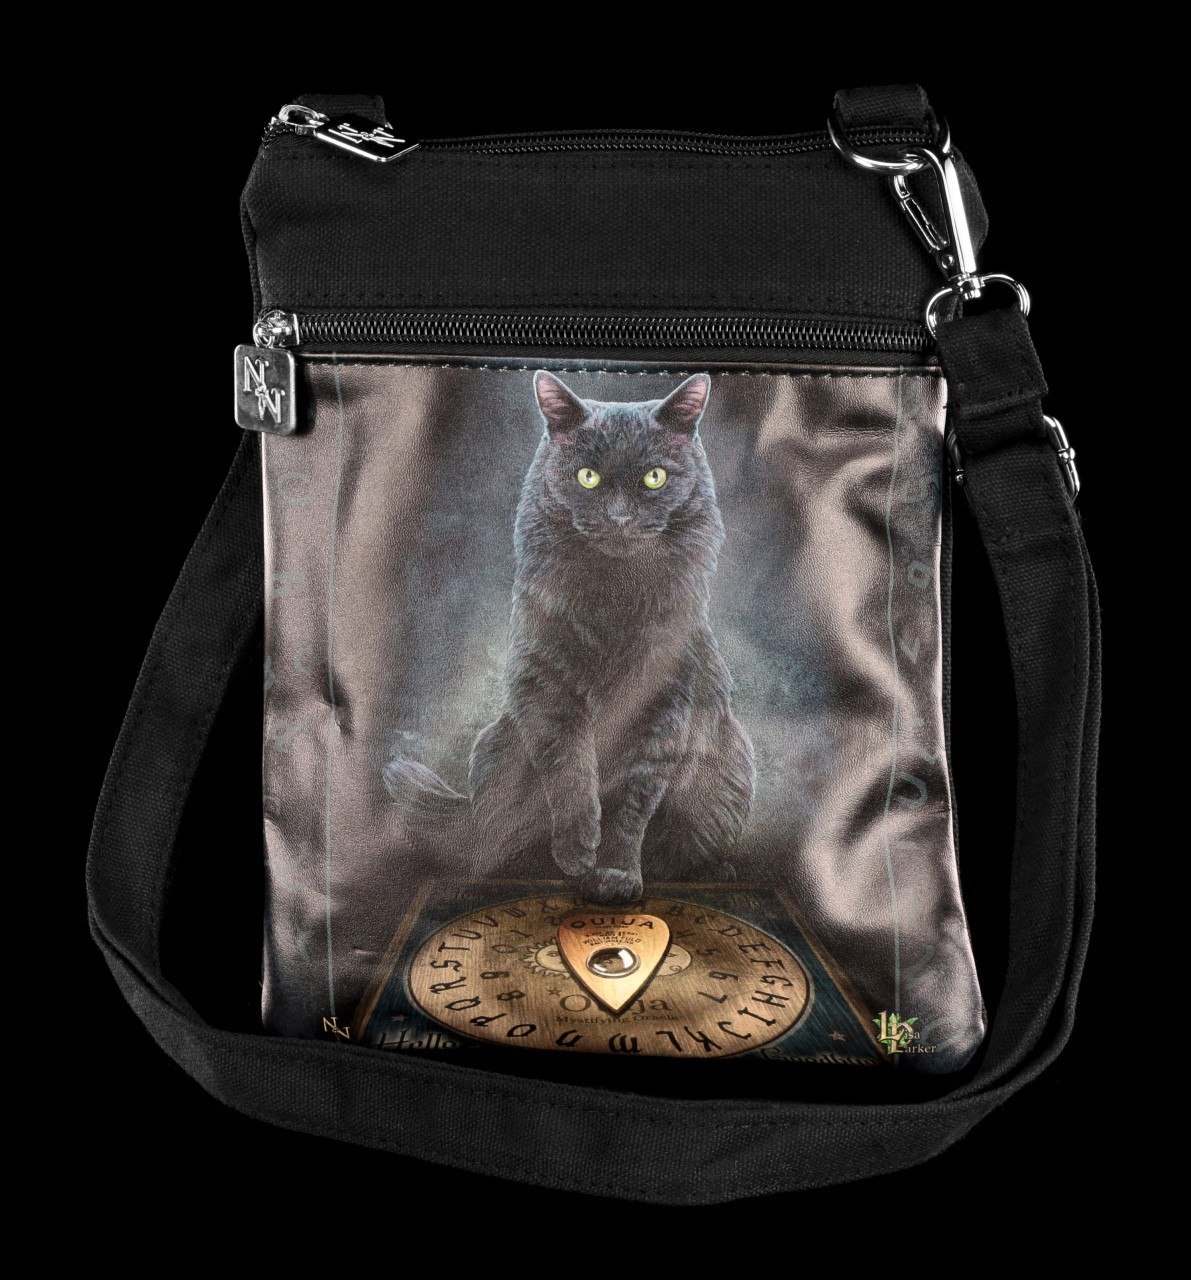 Small Shoulder Bag - His Master's Voice